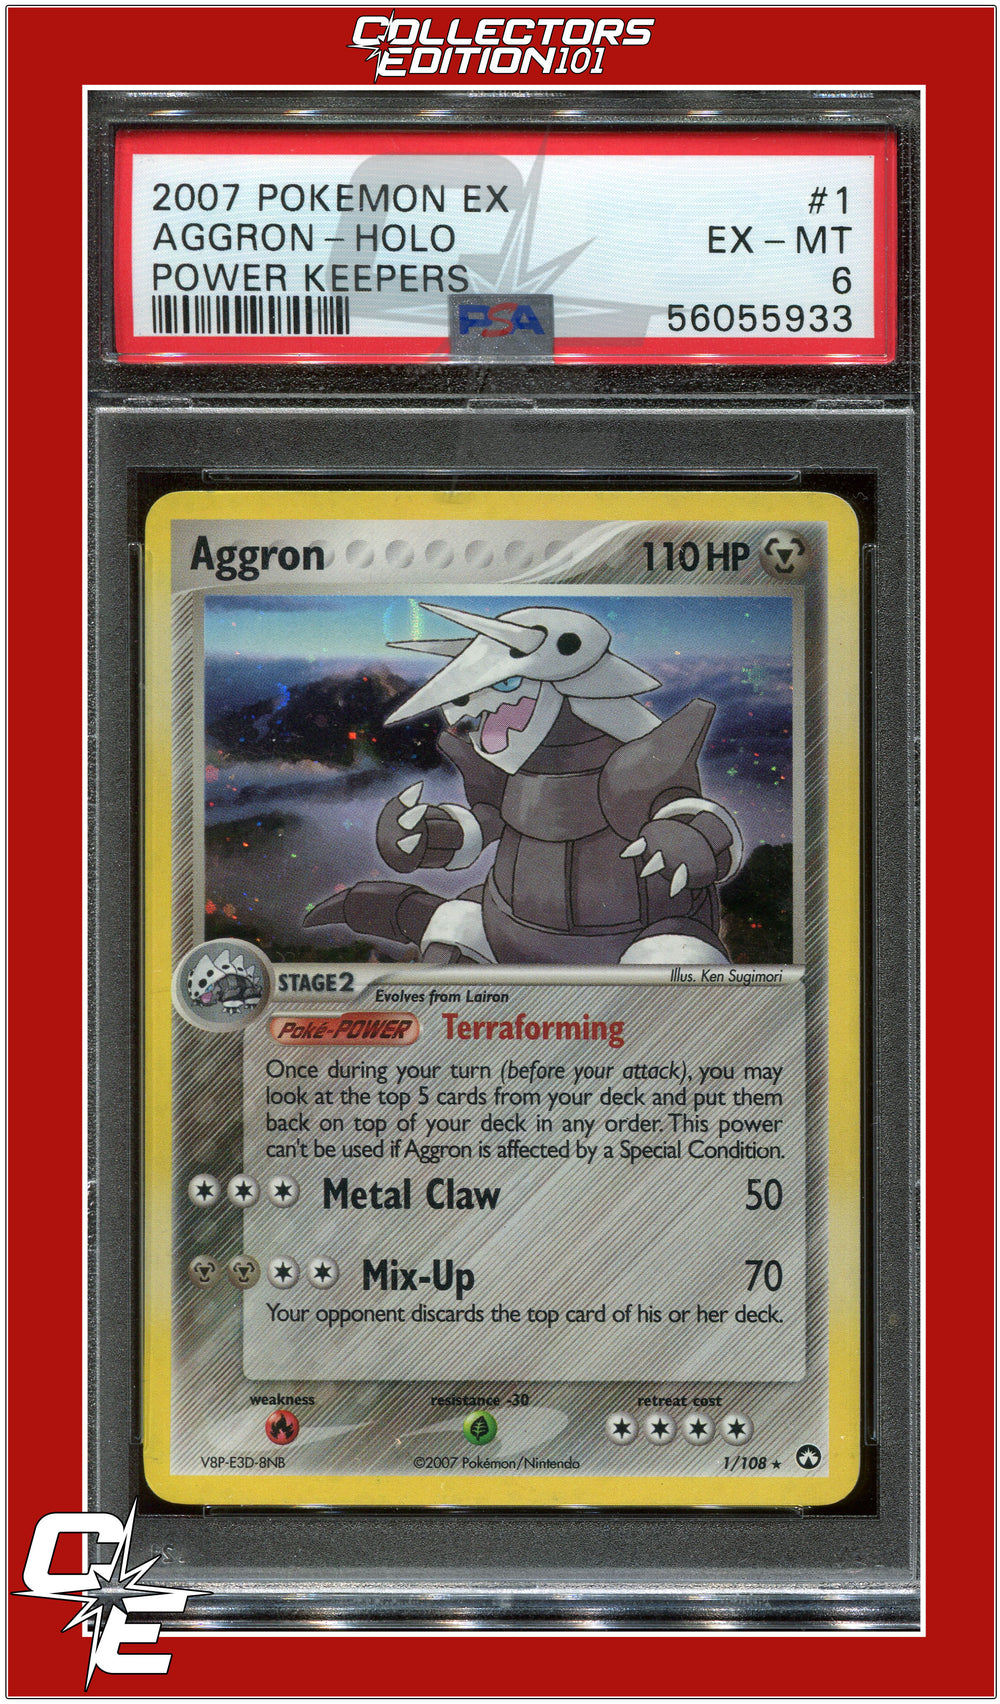 EX Power Keepers 1 Aggron Holo PSA 6